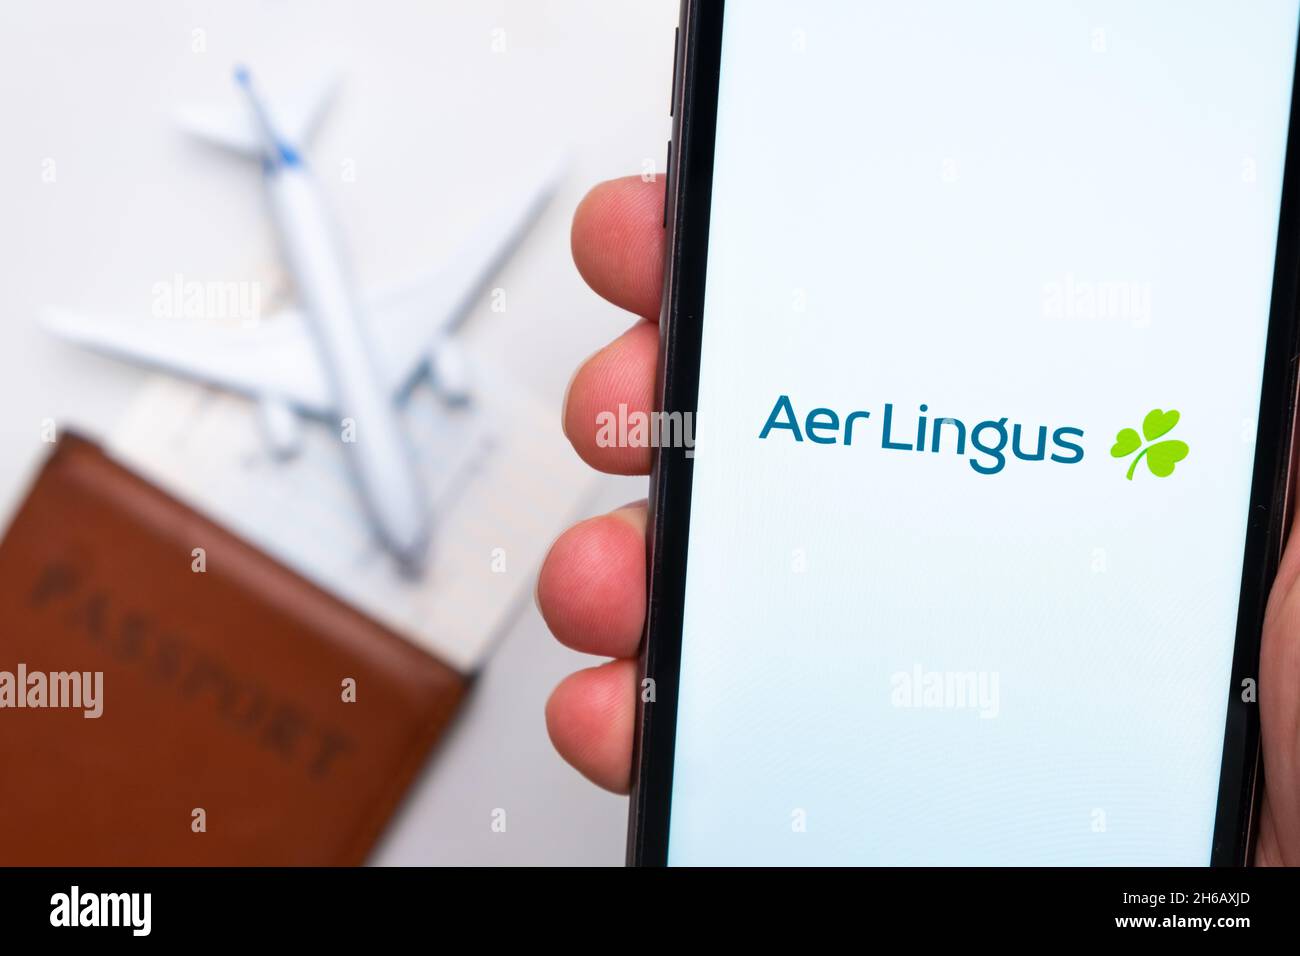 Aer Lingus Airline application on the smartphone screen mans hand. A white toy airplane and a passport are lying on a table with a light surface.November 2021, San Francisco, USA Stock Photo